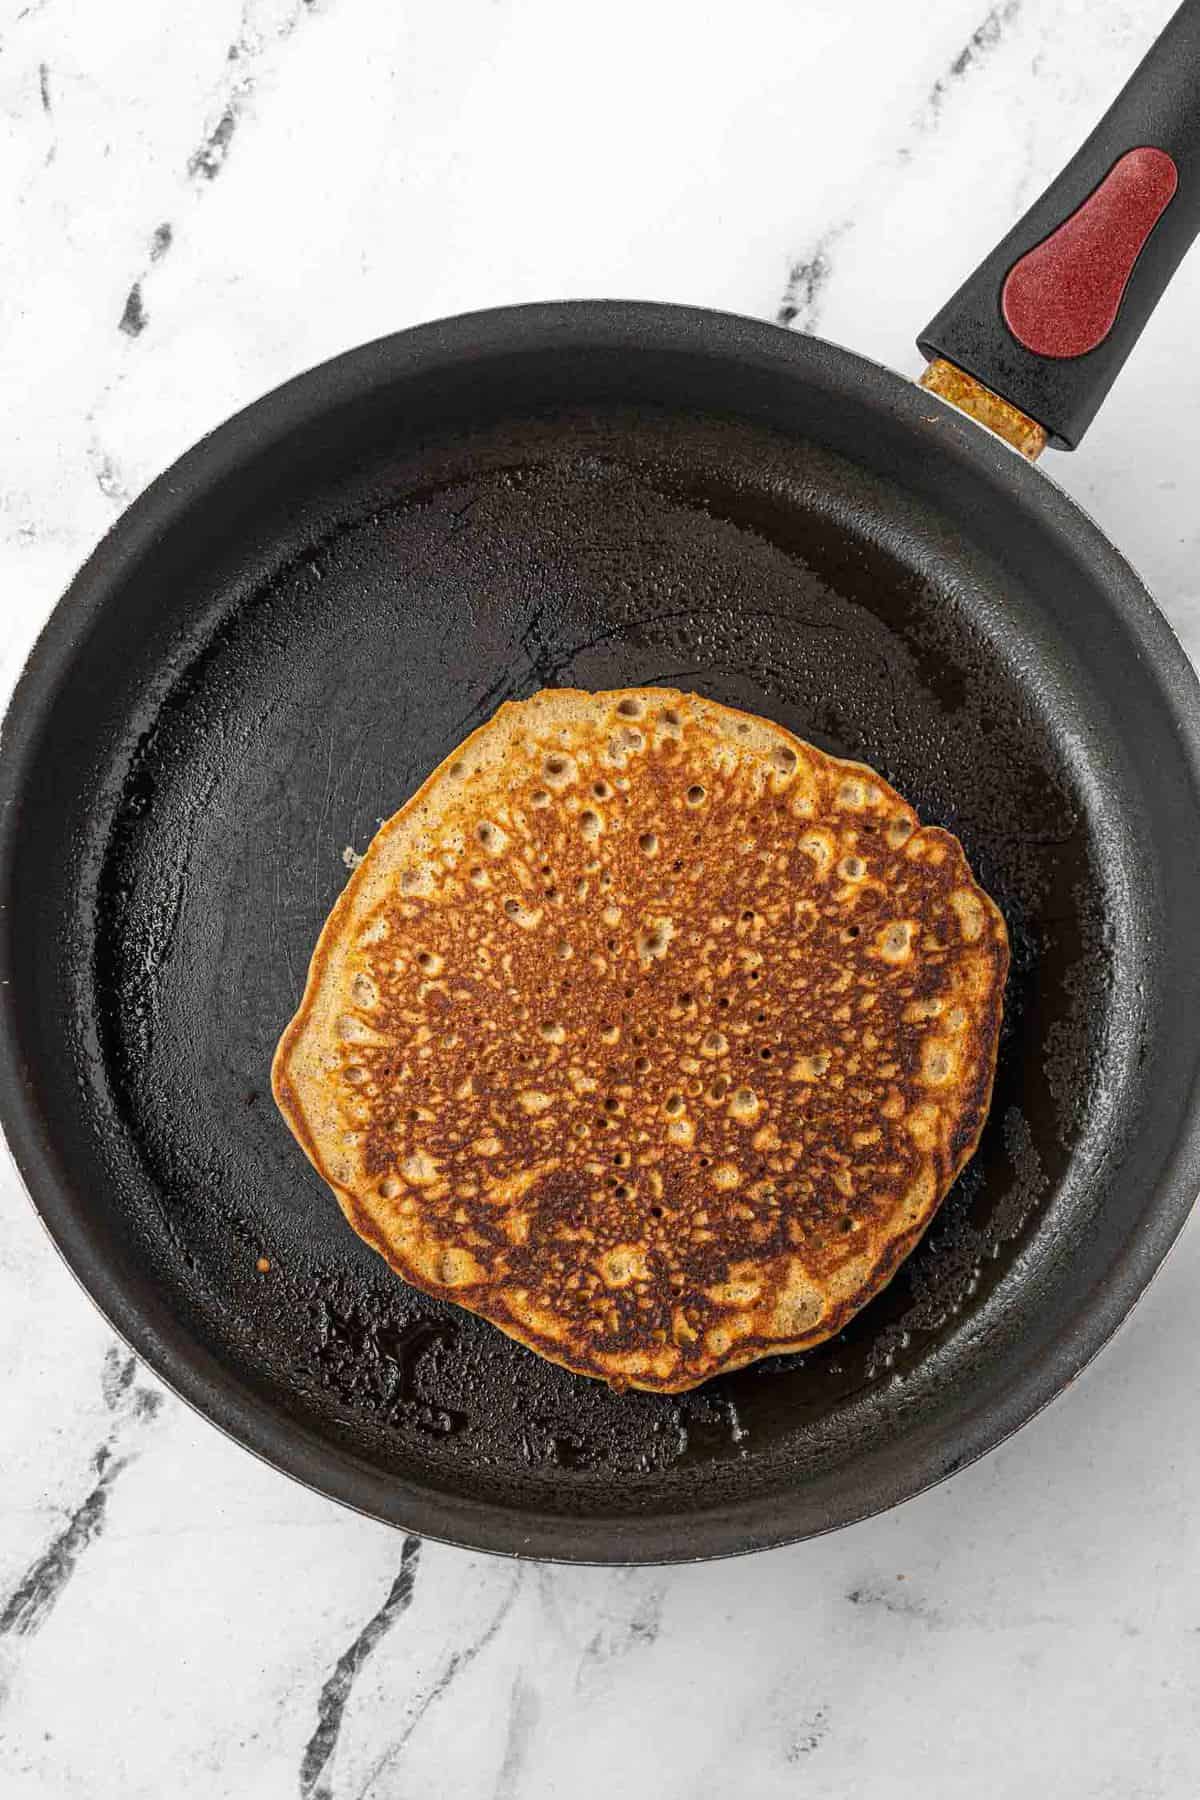 Cooked pancake in a skillet.